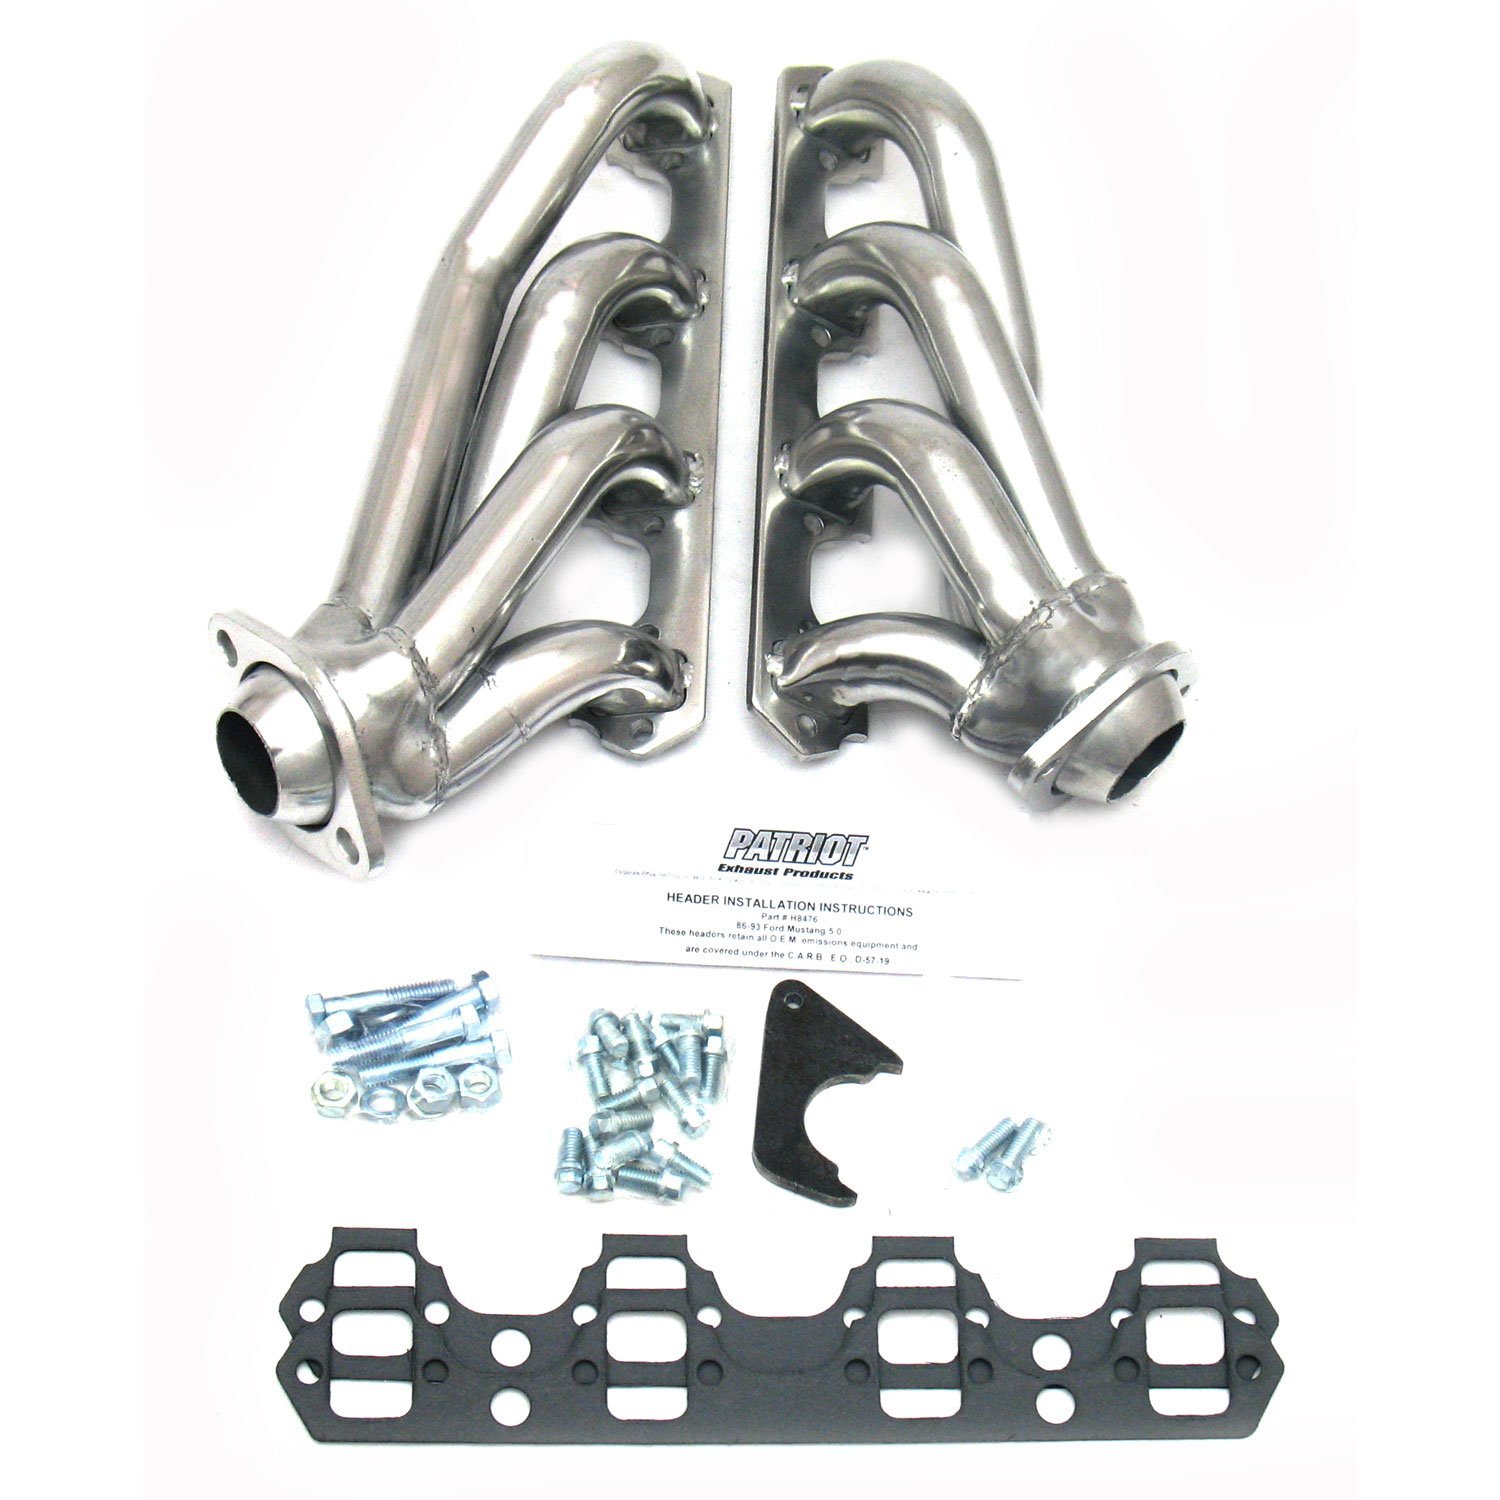 Ford Specific Fit Headers 1986-1993 Ford Mustang/Cougar